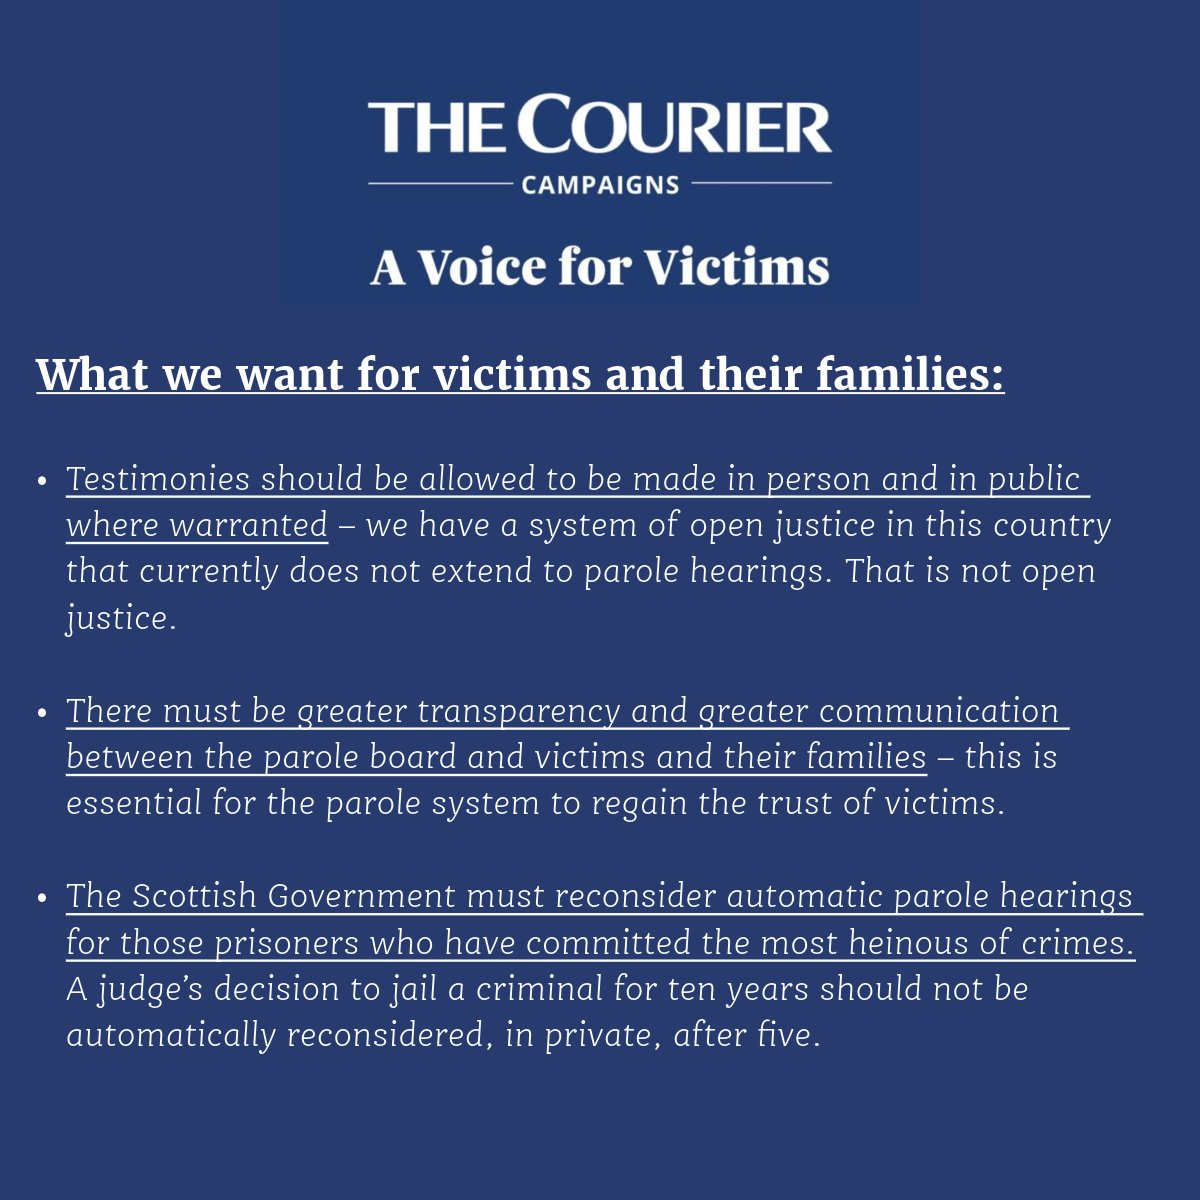 A Voice for Victims: Today we launch our campaign to reform parole hearings in Scotland 🧵